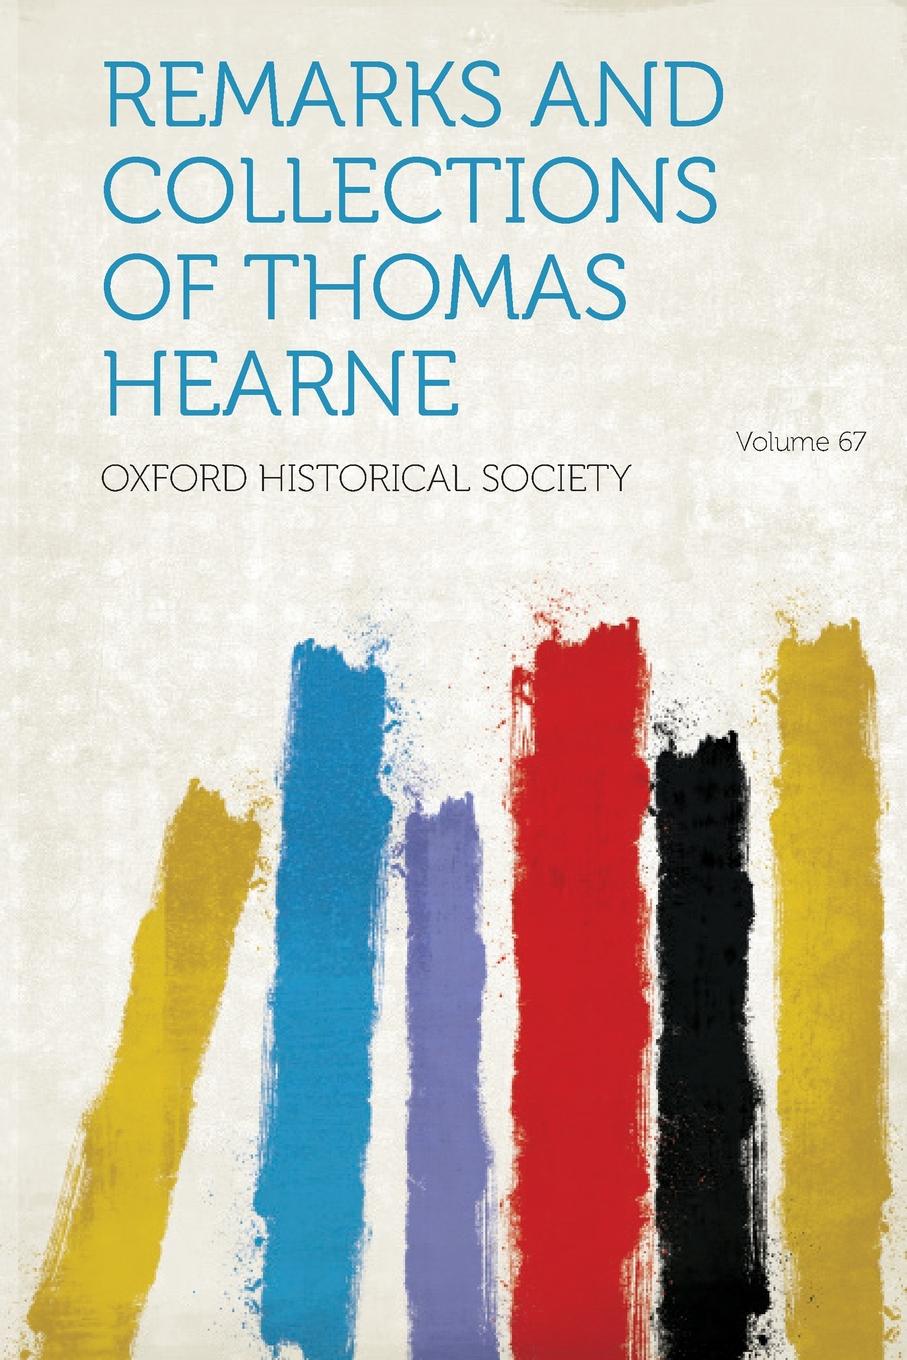 Remarks and Collections of Thomas Hearne Volume 67